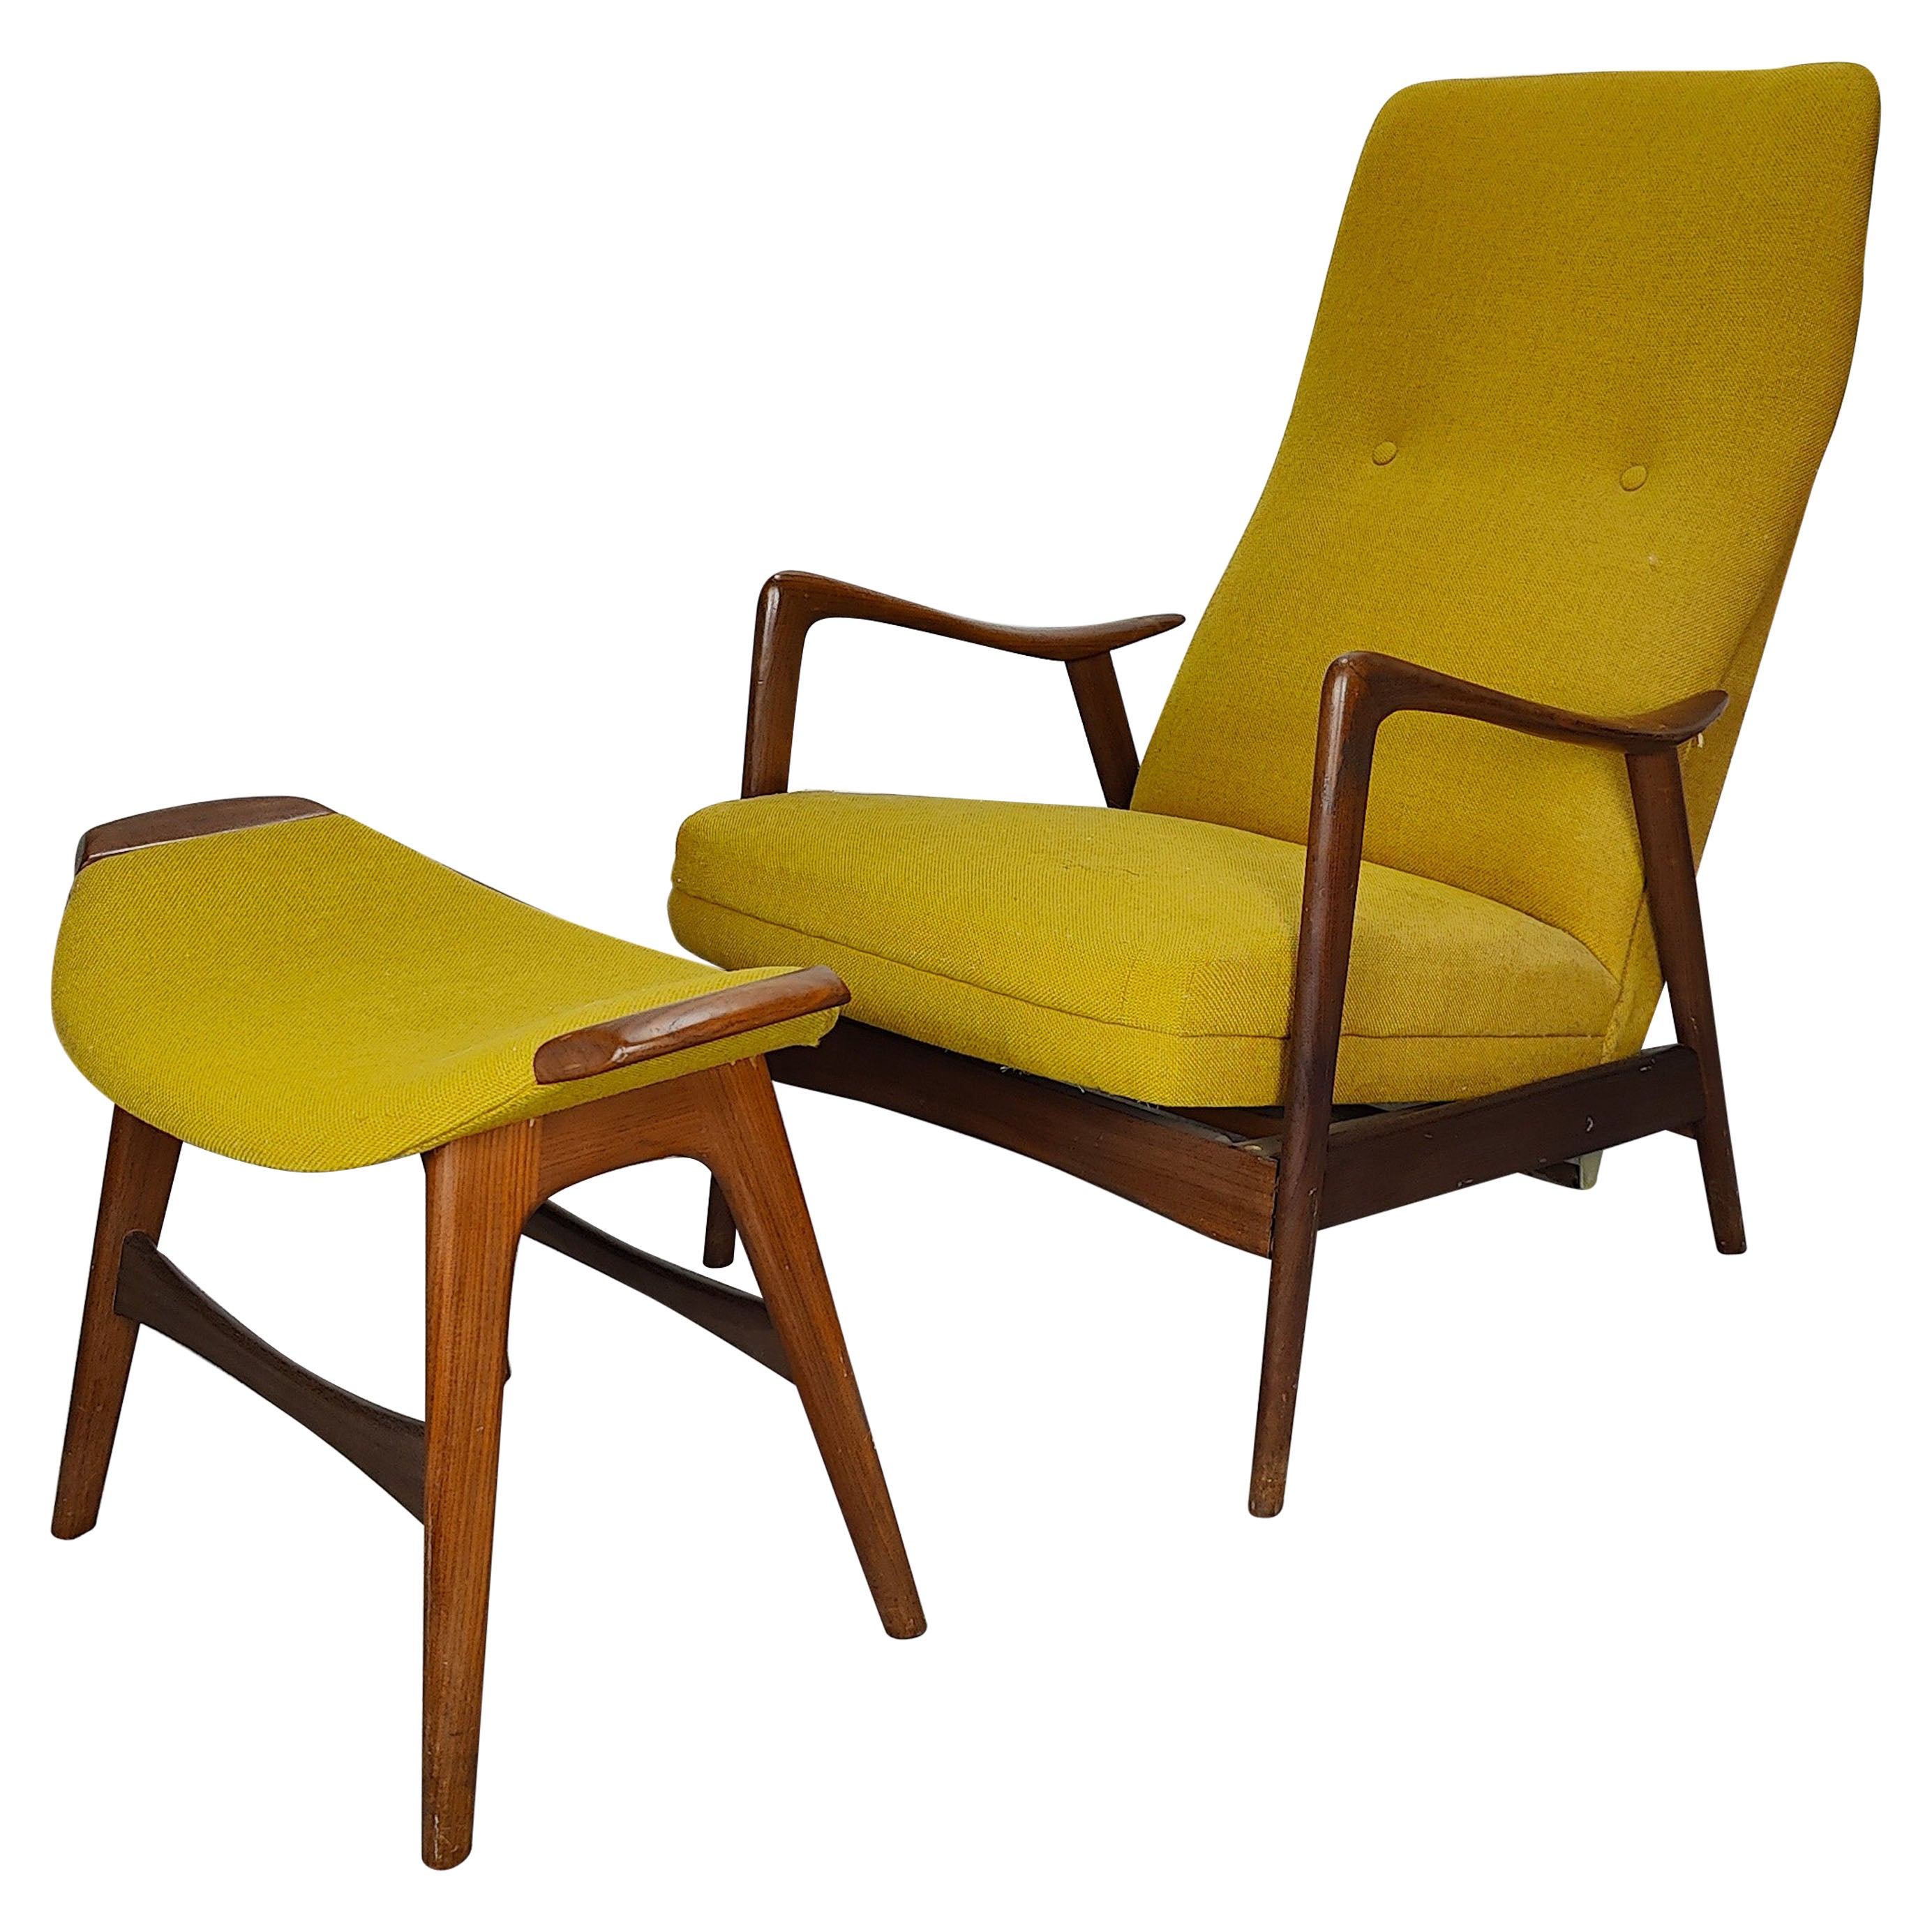 Vintage Midcentury Lounge Chair W/ Ottoman by Arnt Lande for Stokke Fabrikker